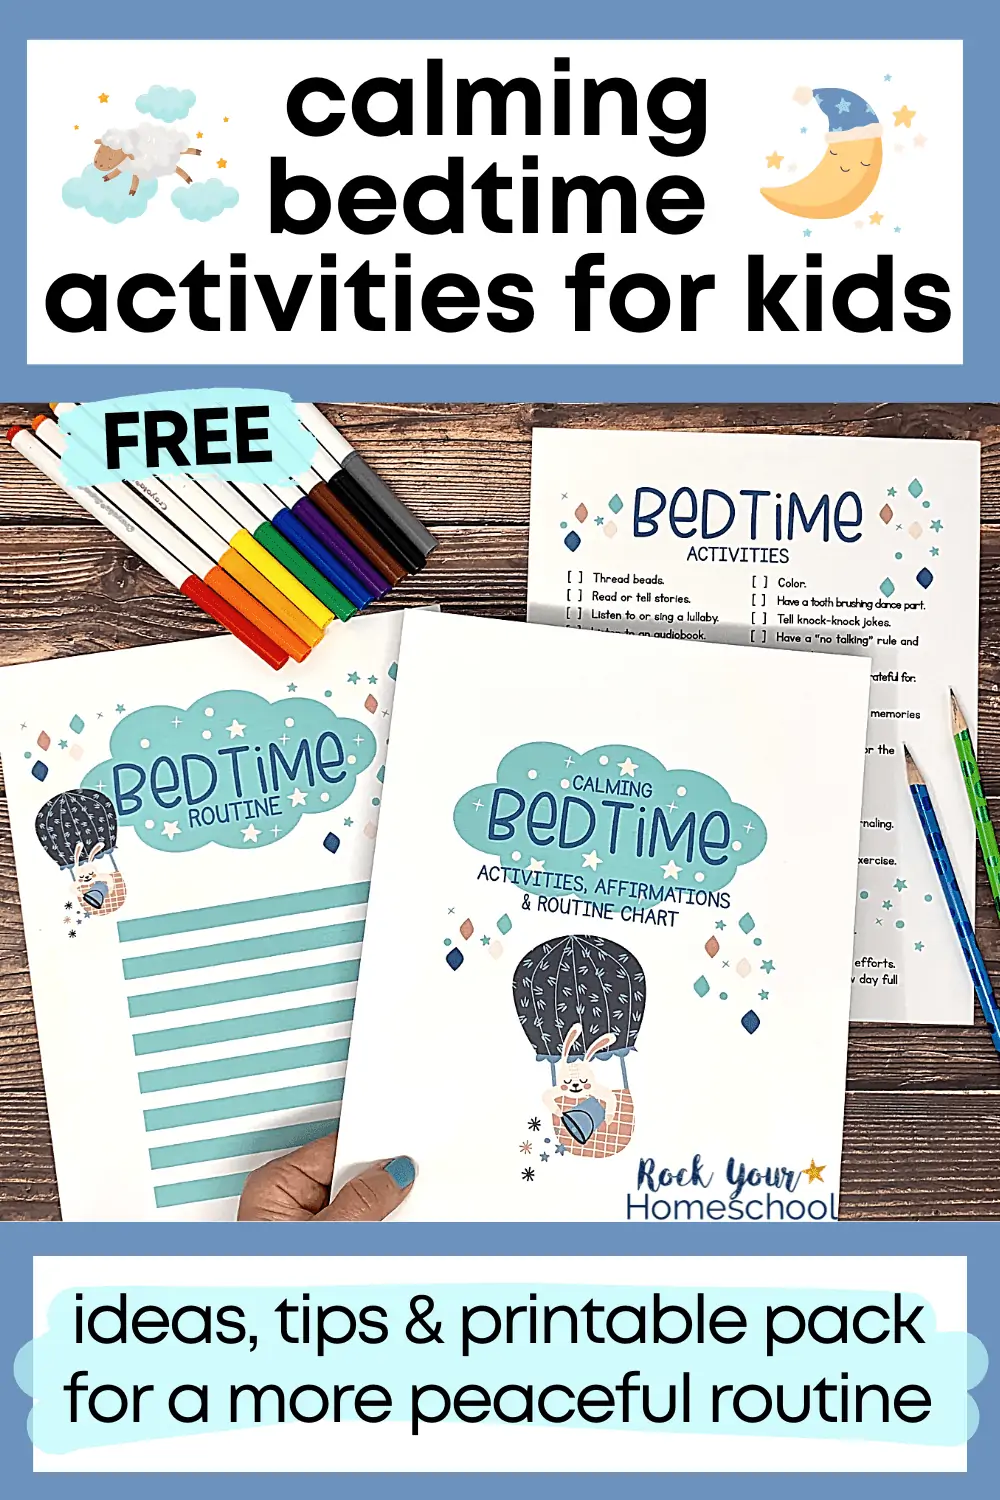 Calming Bedtime Activities for Kids: How to Enjoy a Positive Routine